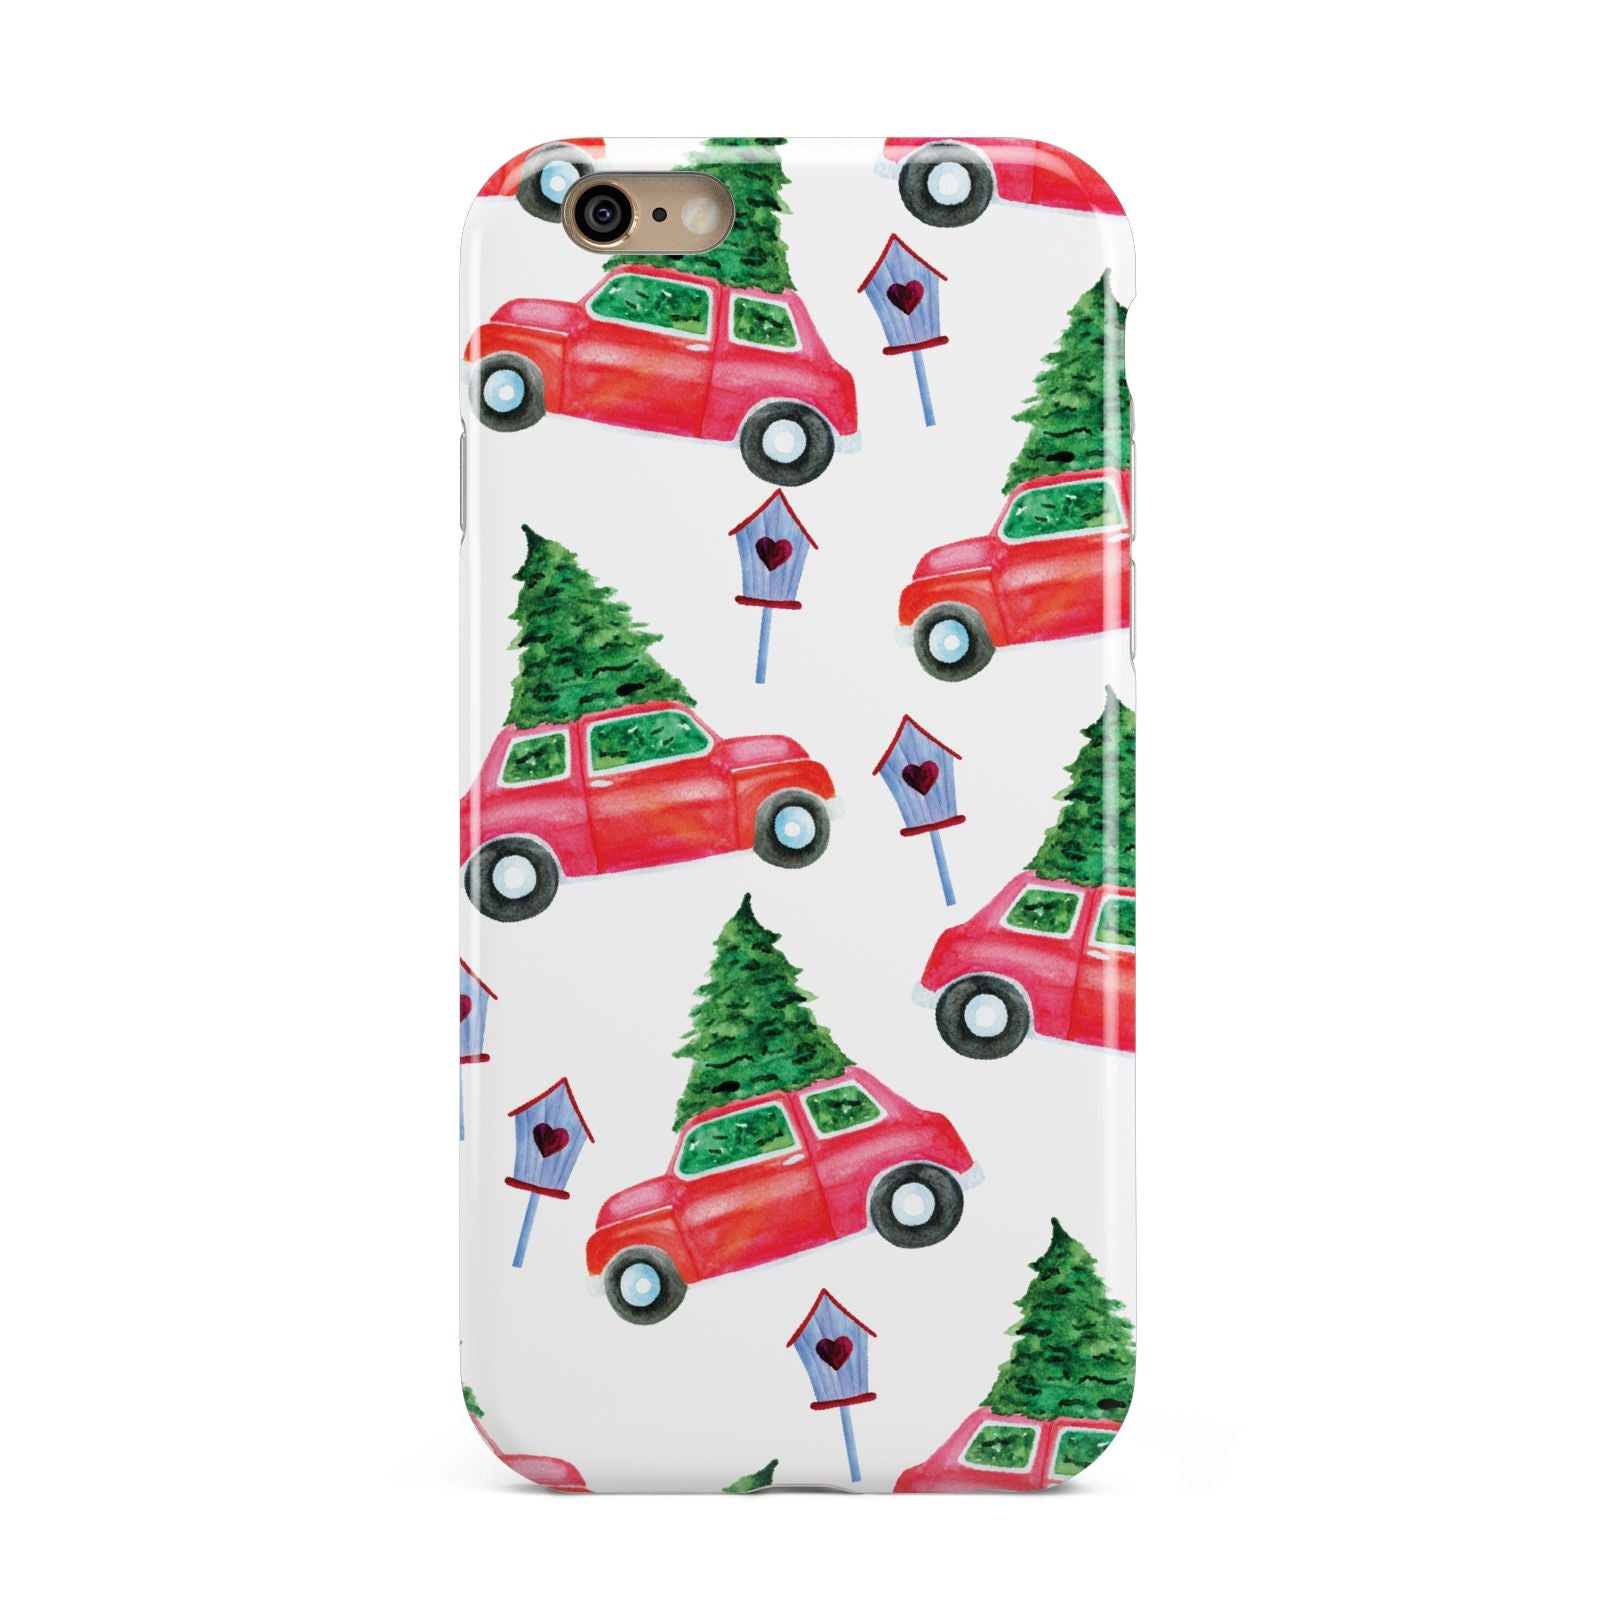 Driving home for Christmas Apple iPhone 6 3D Tough Case